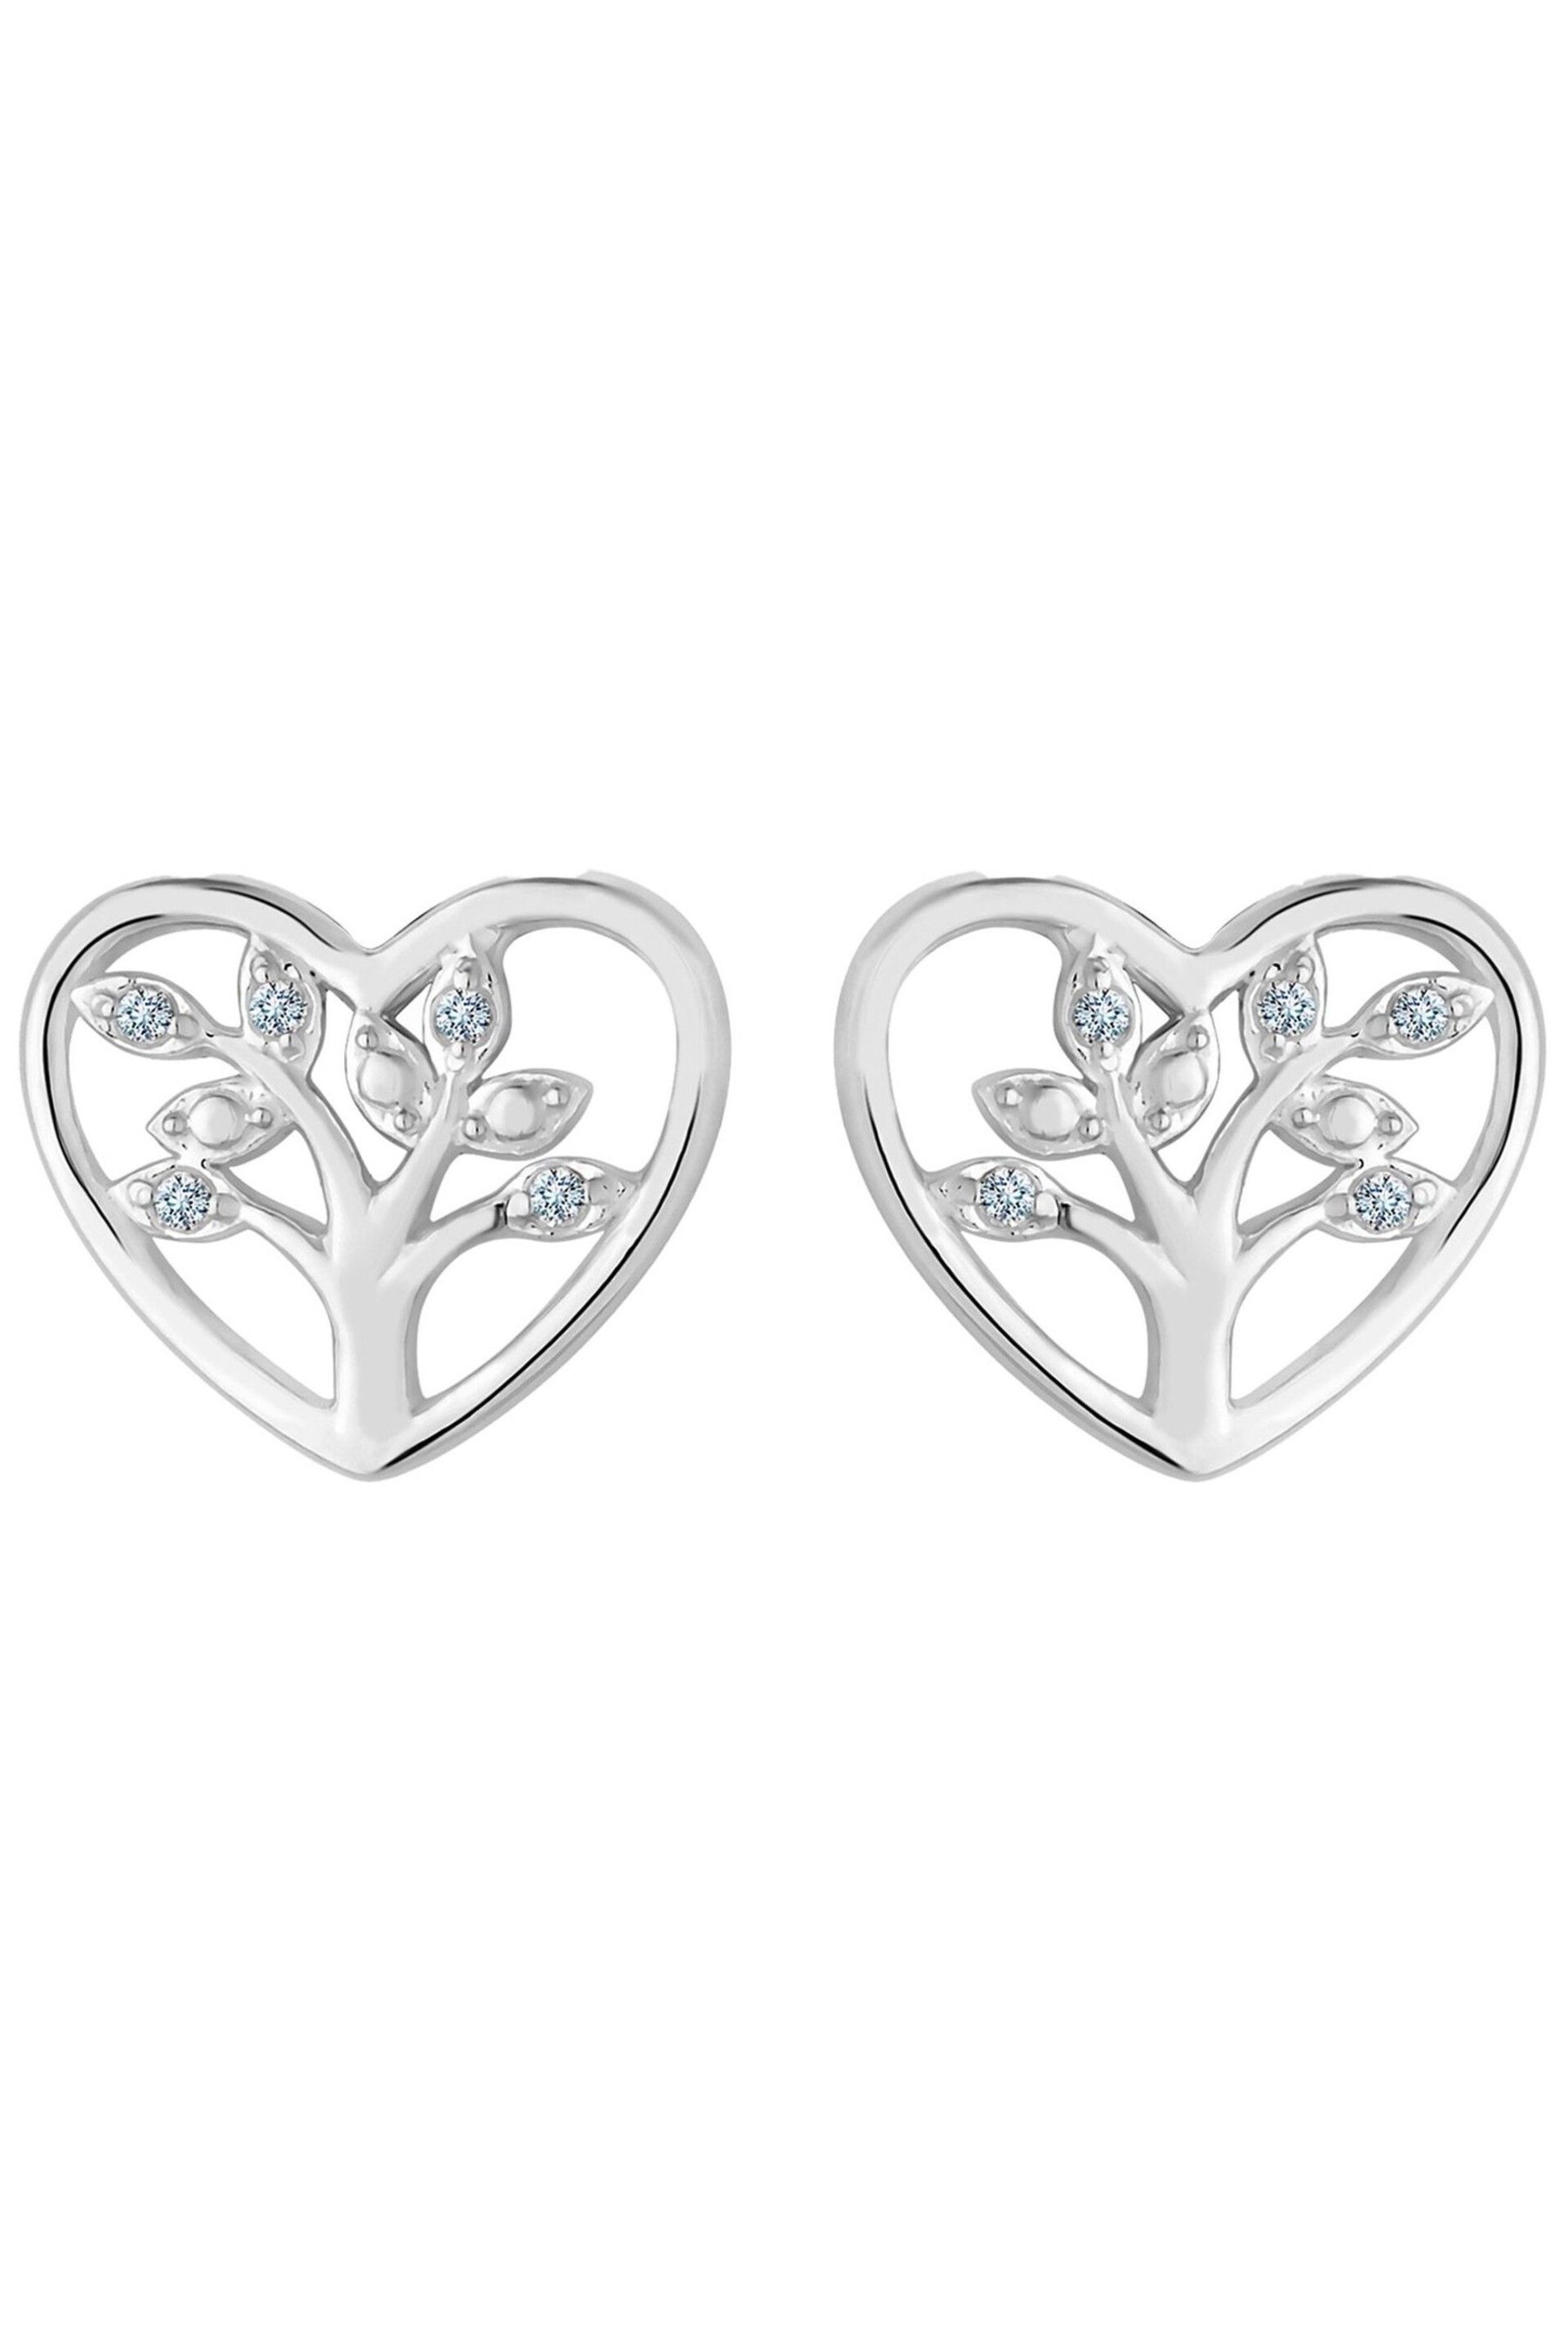 Simply Silver Sterling Silver Tone 925 Tree of Love Heart Stud Earrings - Image 2 of 2